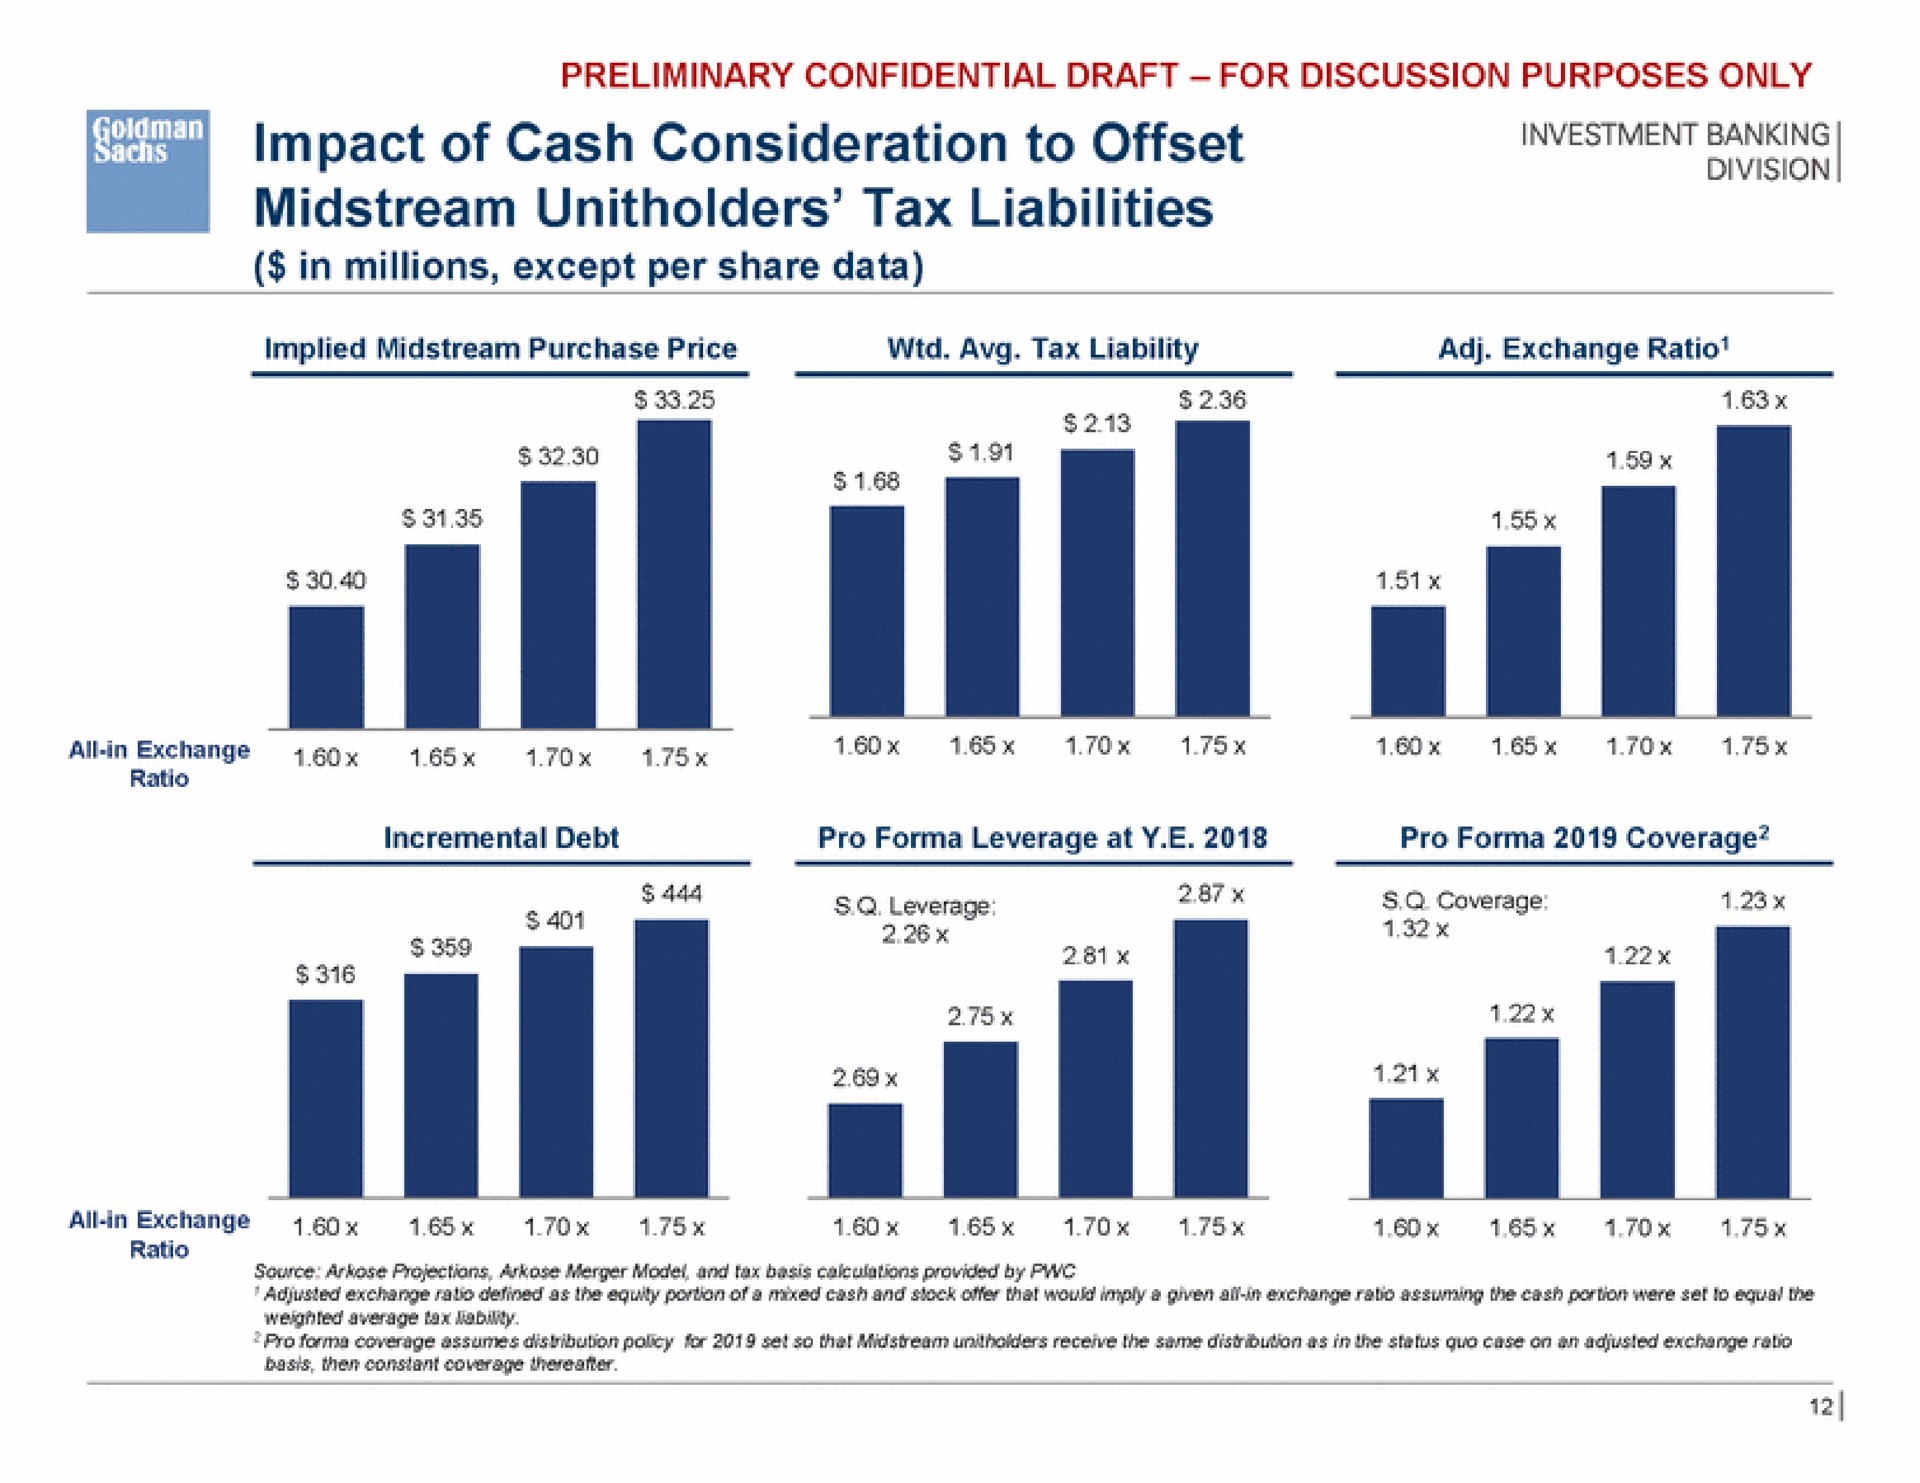 pact of cash consideration to offset investment banking midstream tax liabilities | Goldman Sachs